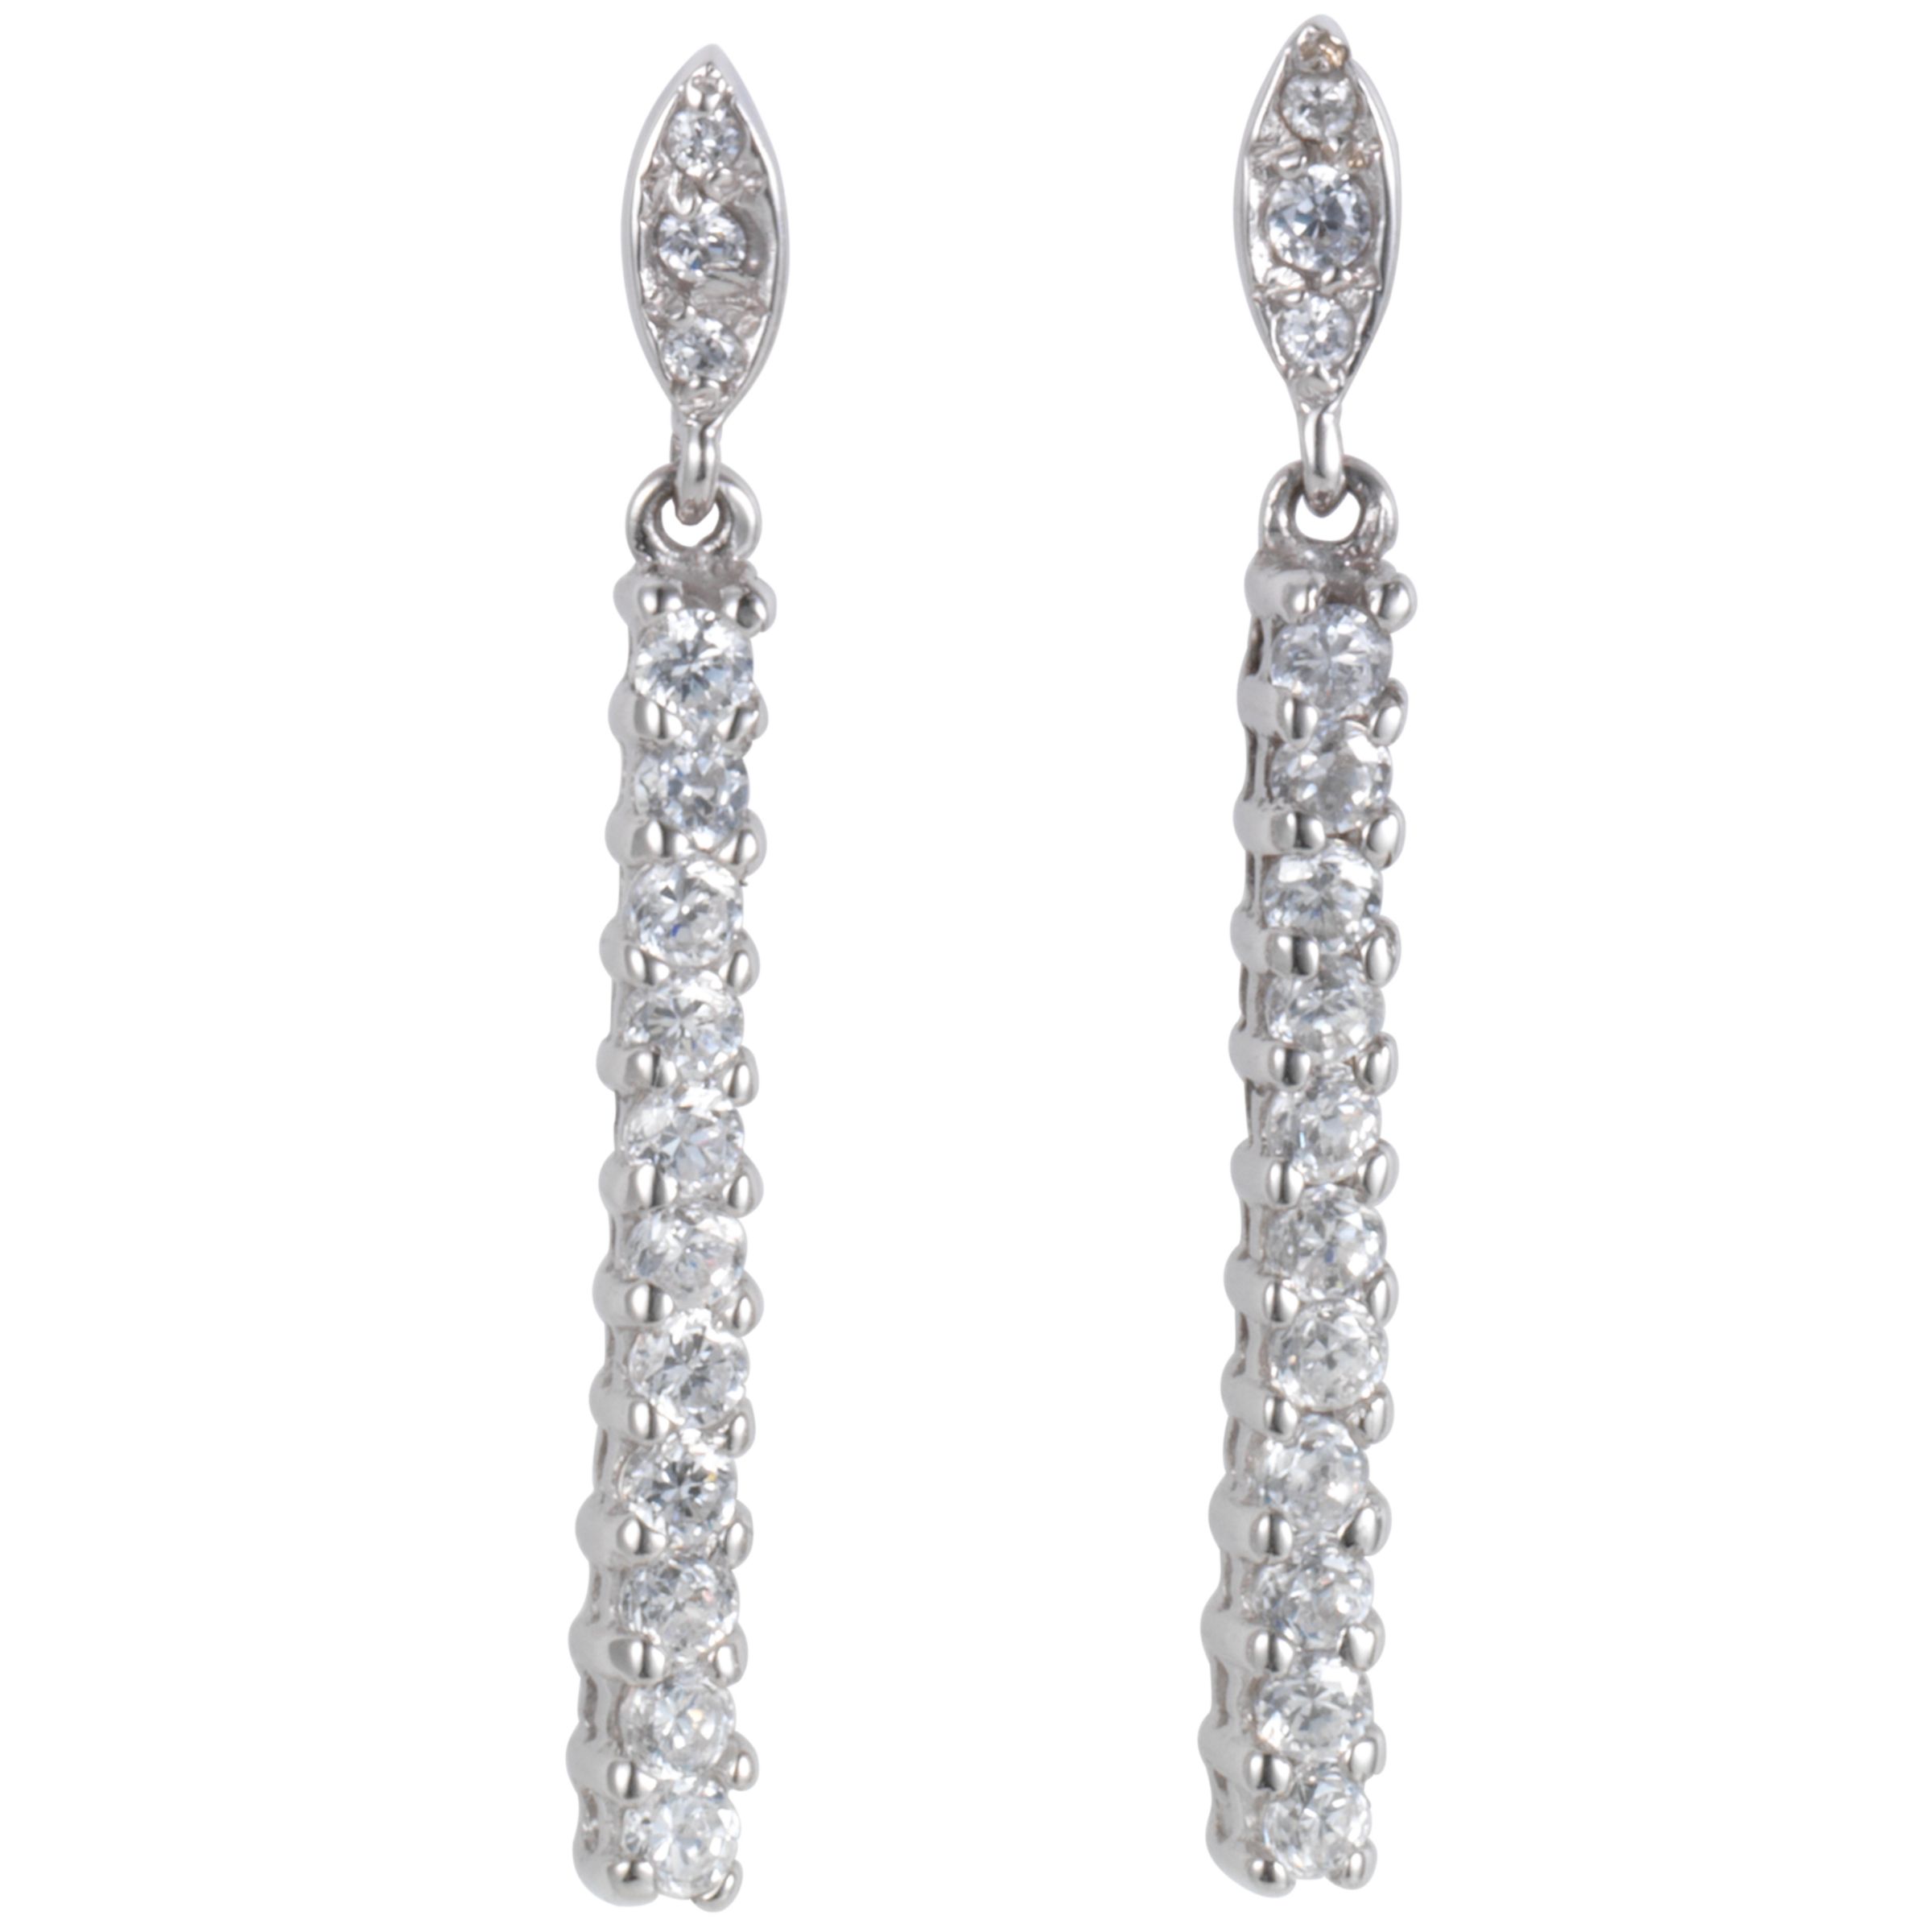 9ct White Gold Cubic Zirconia Bar Drop Earrings at JohnLewis